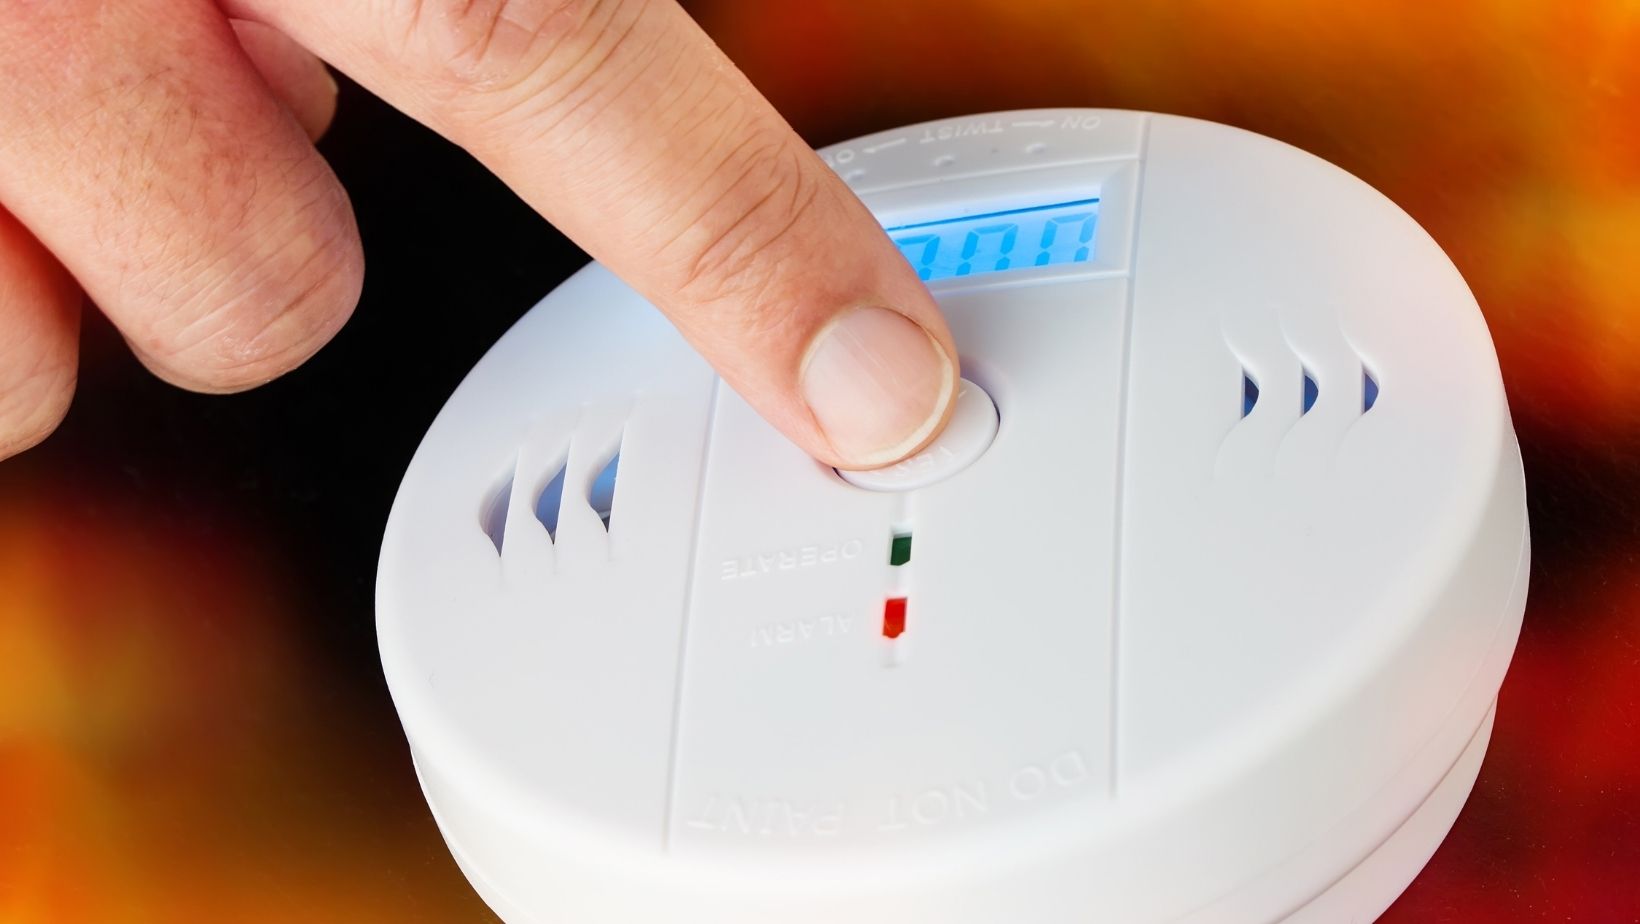 Carbon monoxide in RVs is extremely dangerous. A detector you can test is important for your family's safety.